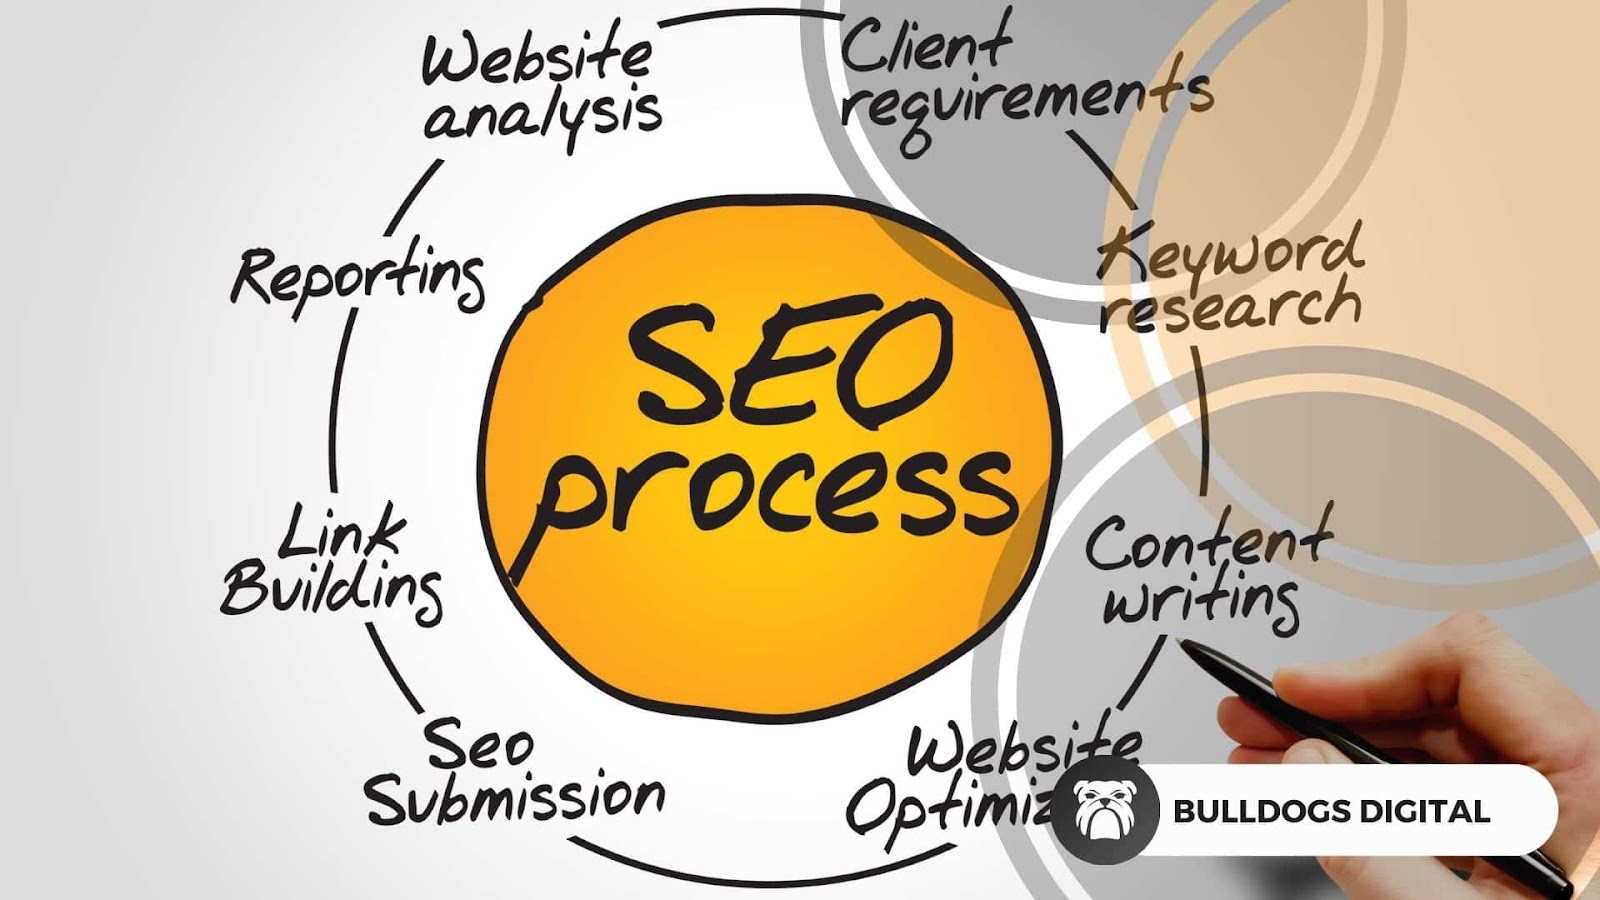 Construction company website optimized with SEO strategies for enhanced online presence.